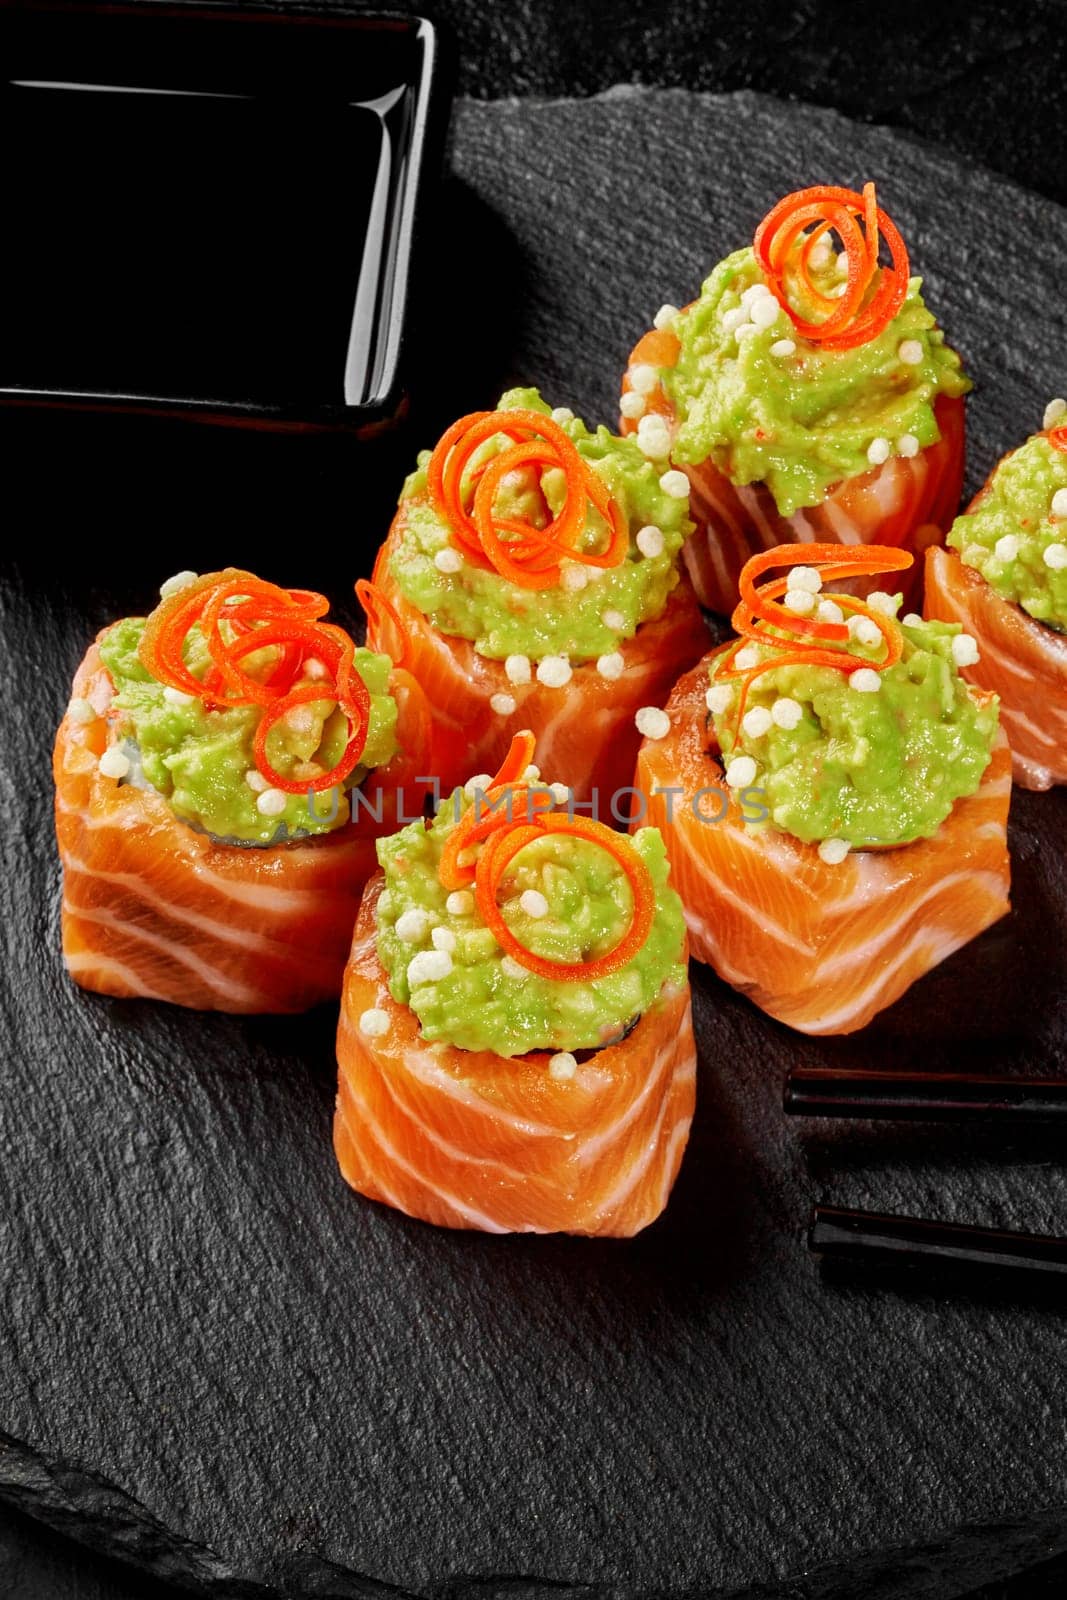 Colorful Japanese sushi rolls wrapped in raw salmon fillet slices topped with spicy avocado spread and crispy rice balls garnished with vegetable shavings served on black slate board with soy sauce